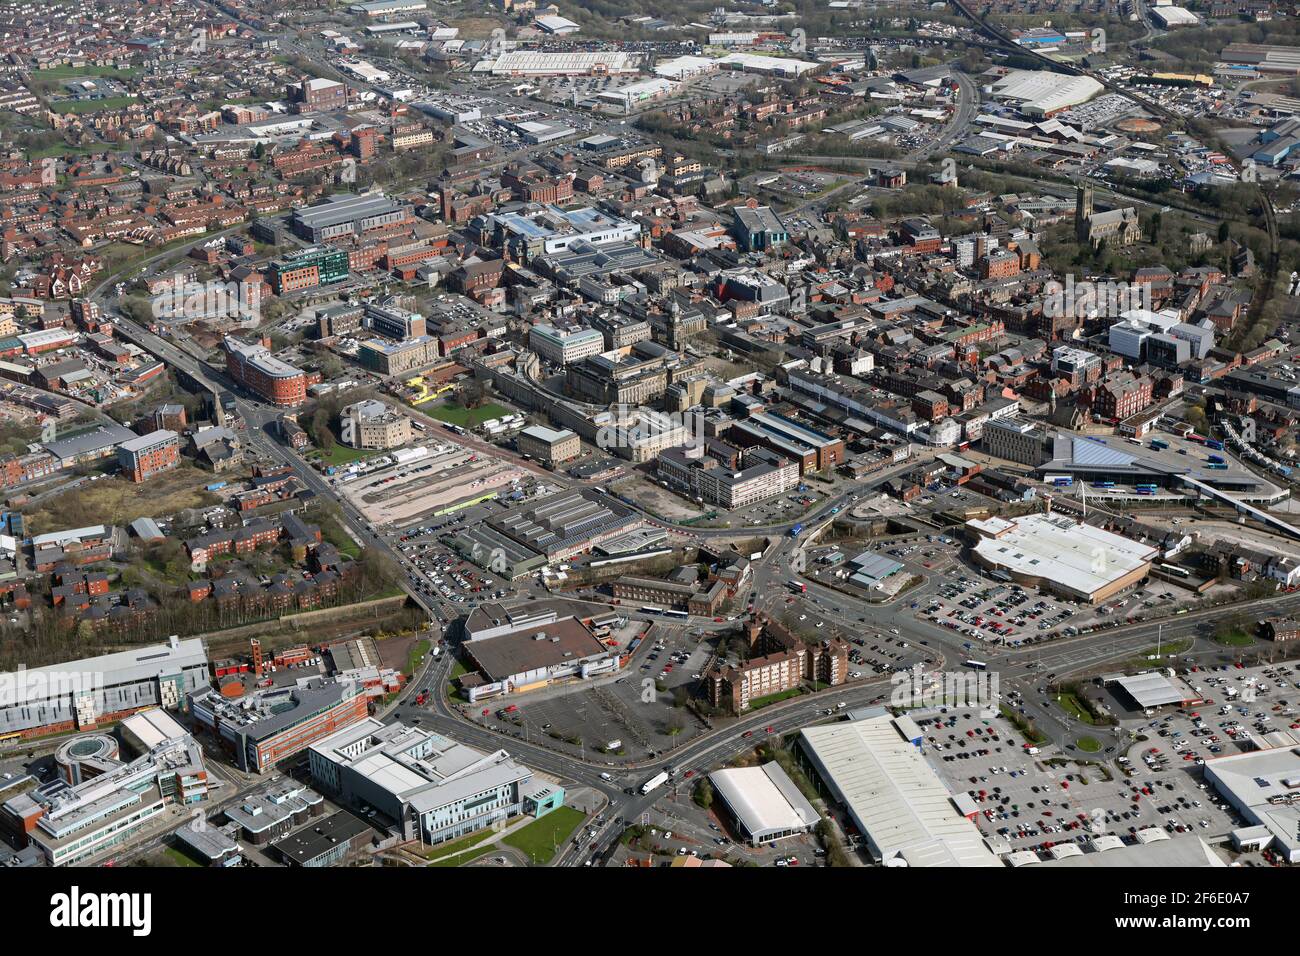 aerial view of the Bolton town centre skyline with Bolton Shopping Outlet, Bolton Market and Morrisons supermarket prominent in the foreground Stock Photo